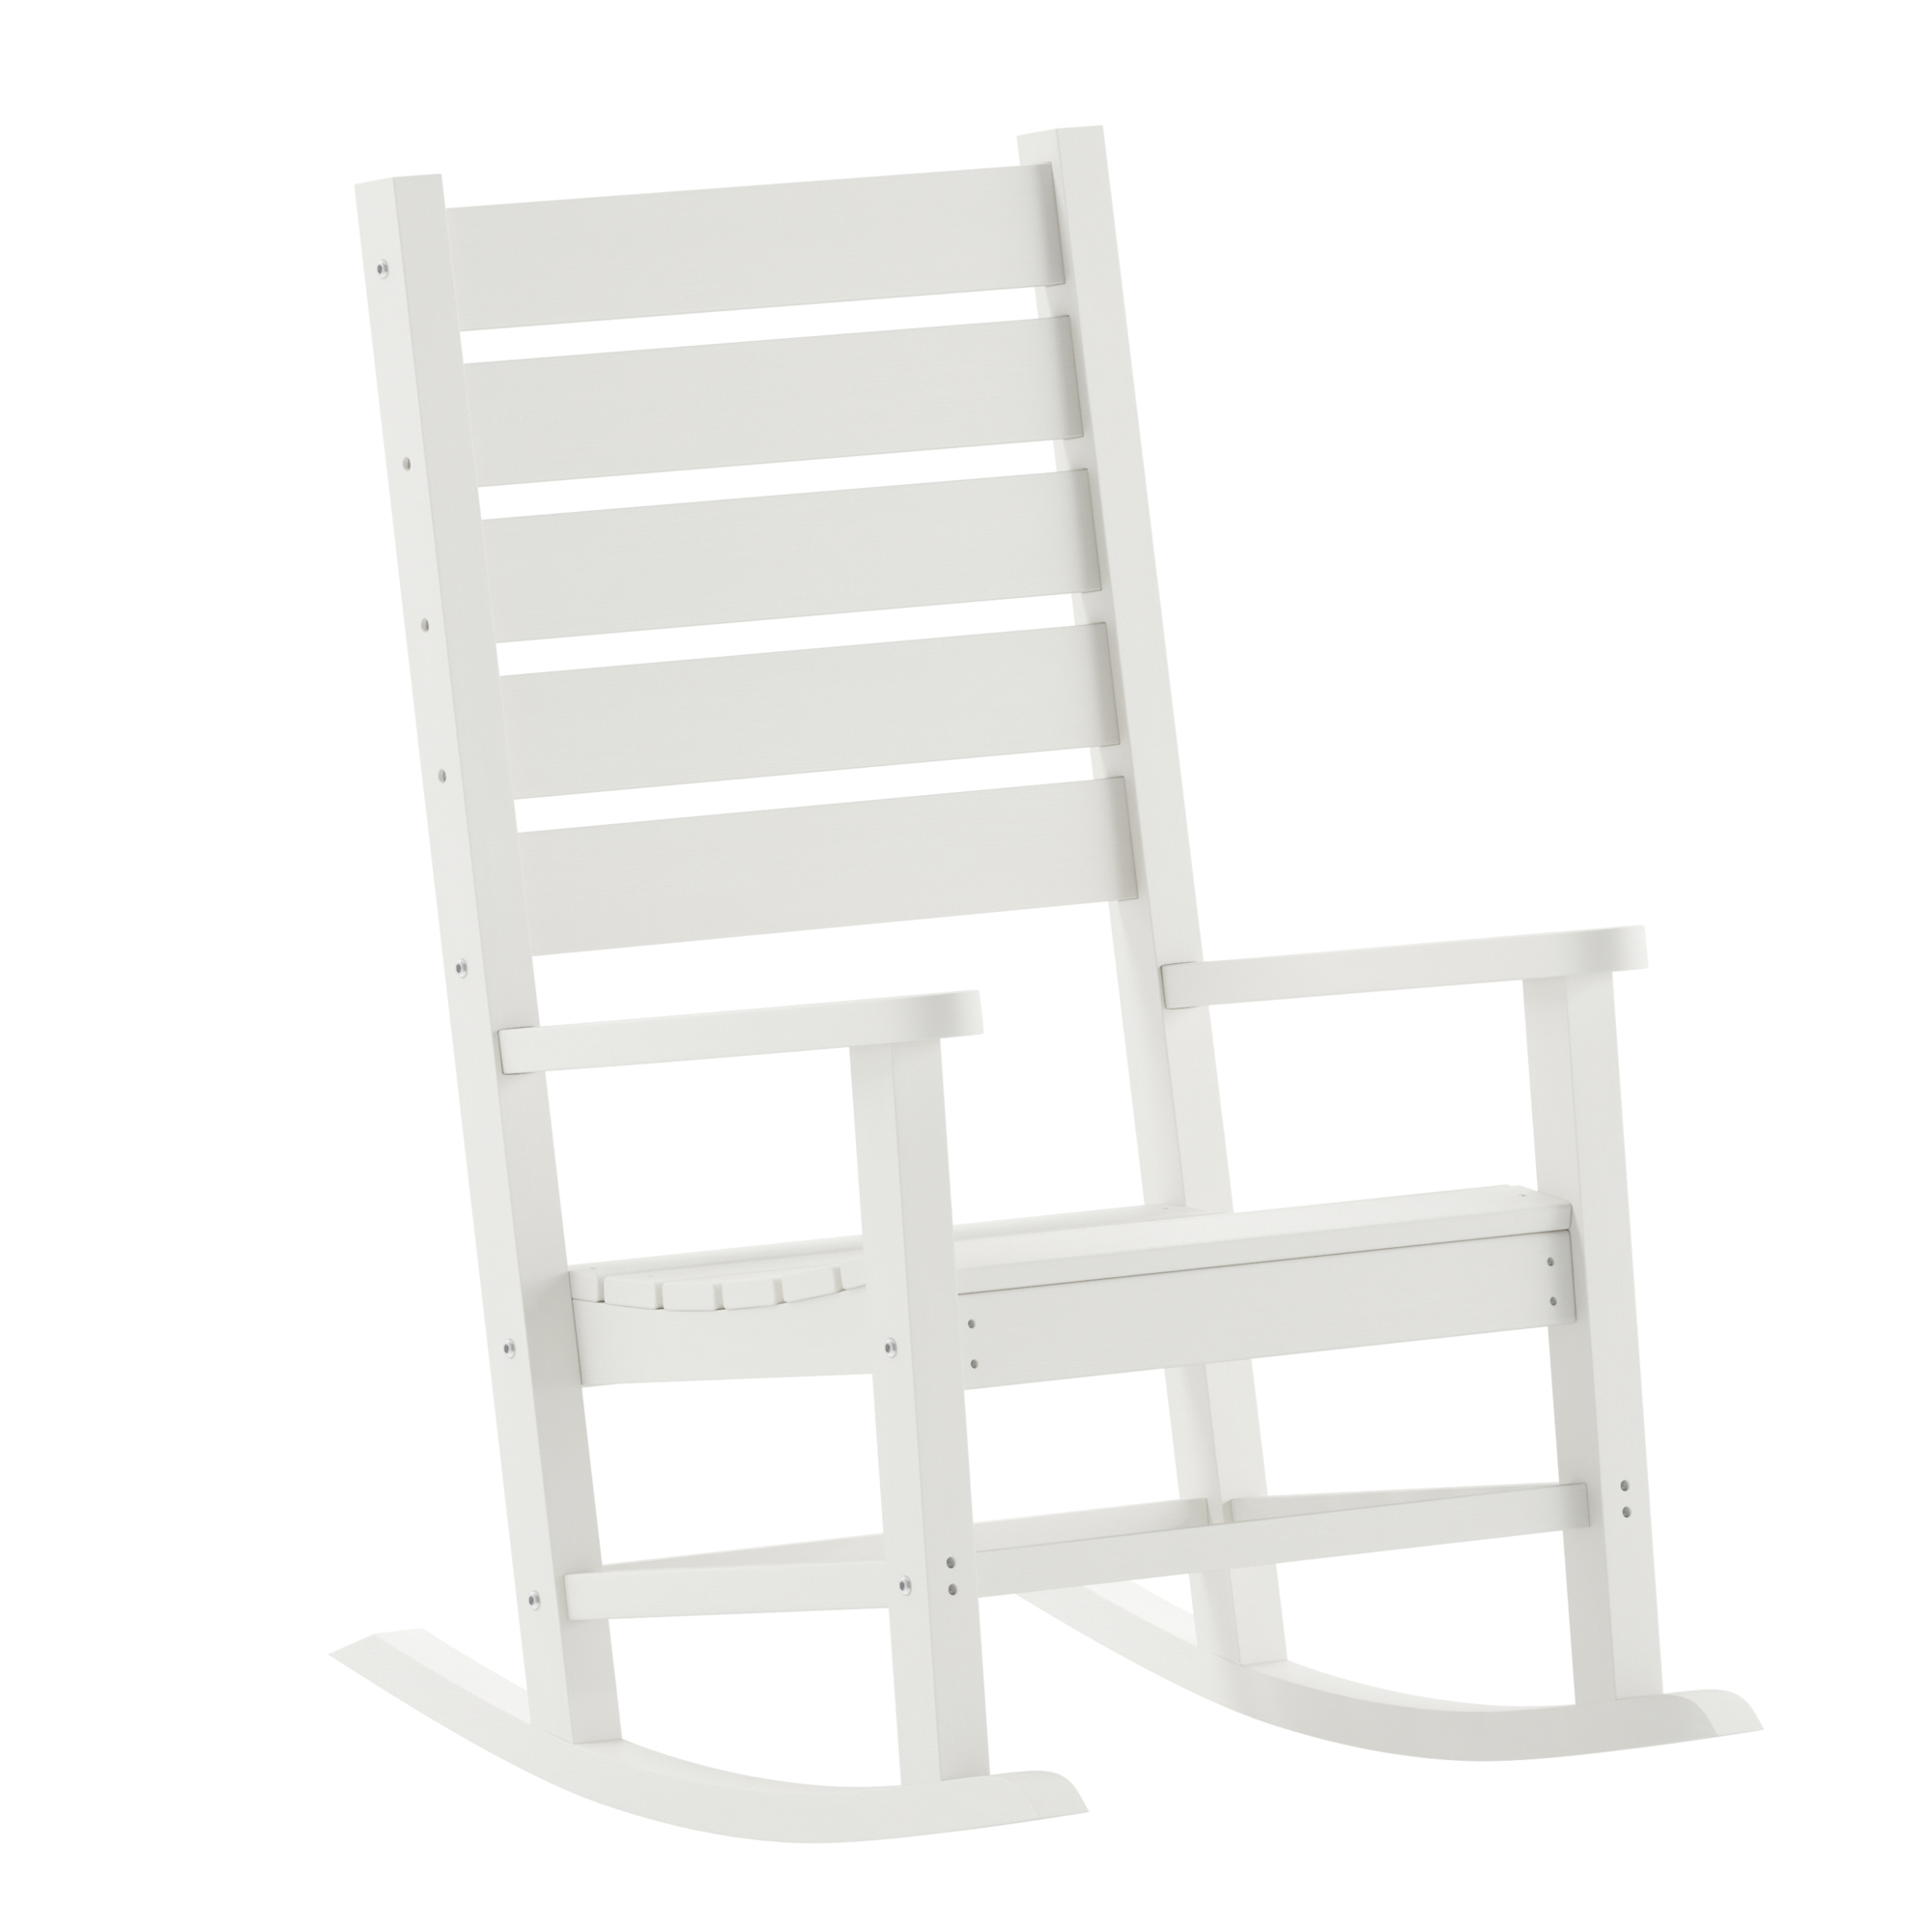 Flash Furniture, White All-Weather Classic Outdoor Rocking Chair, Primary Color White, Material HDPE, Width 26.5 in, Model LEHMP2002110WT